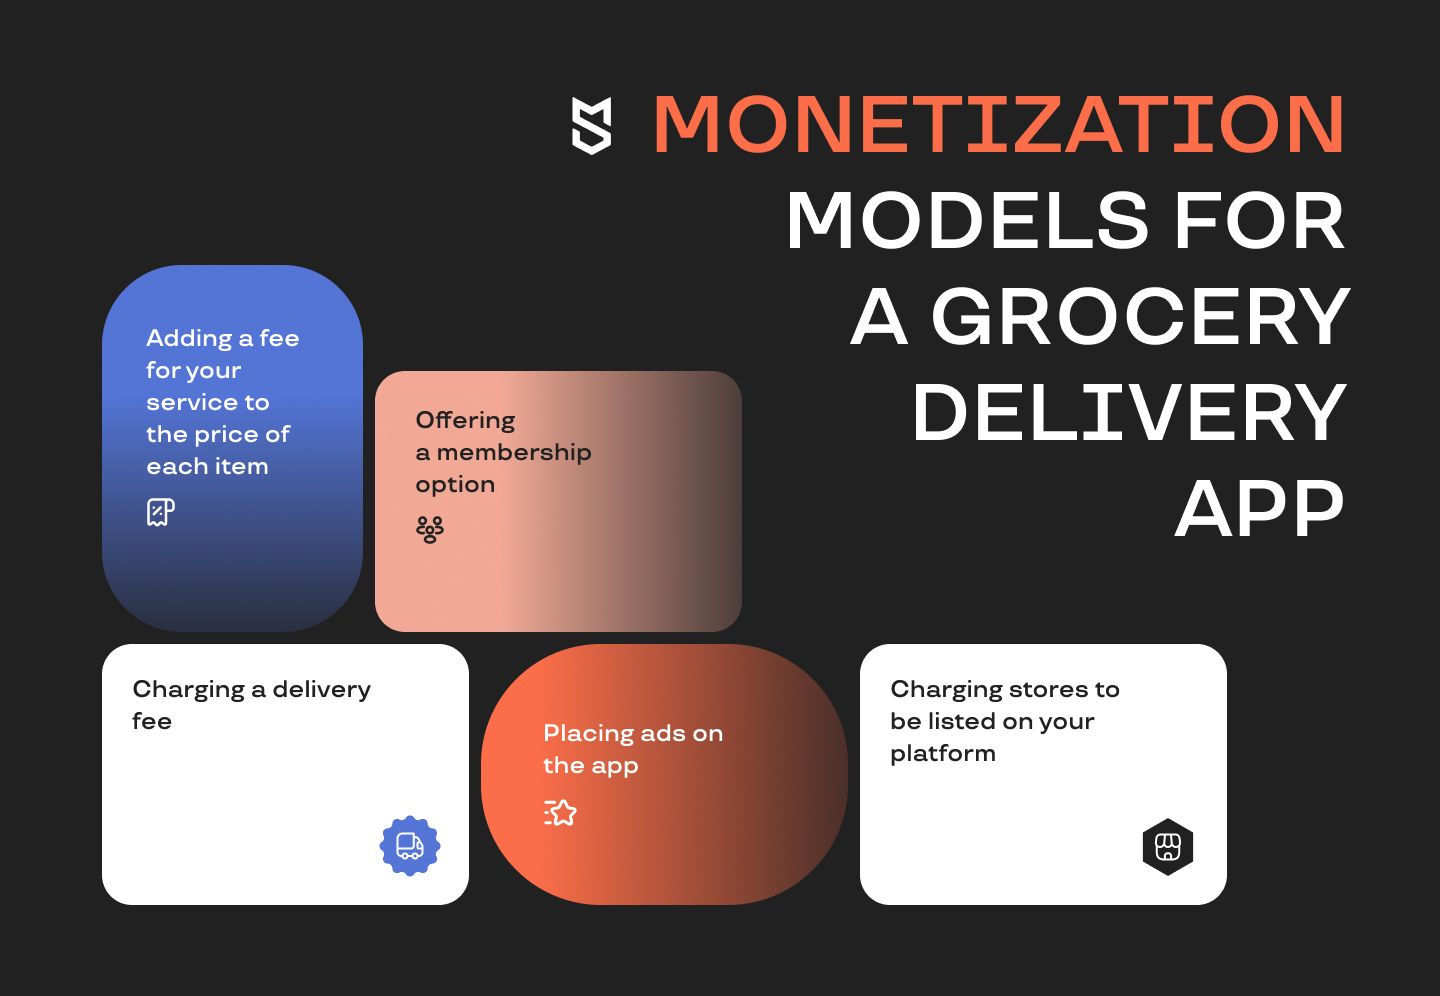 Monetization models for a grocery delivery app